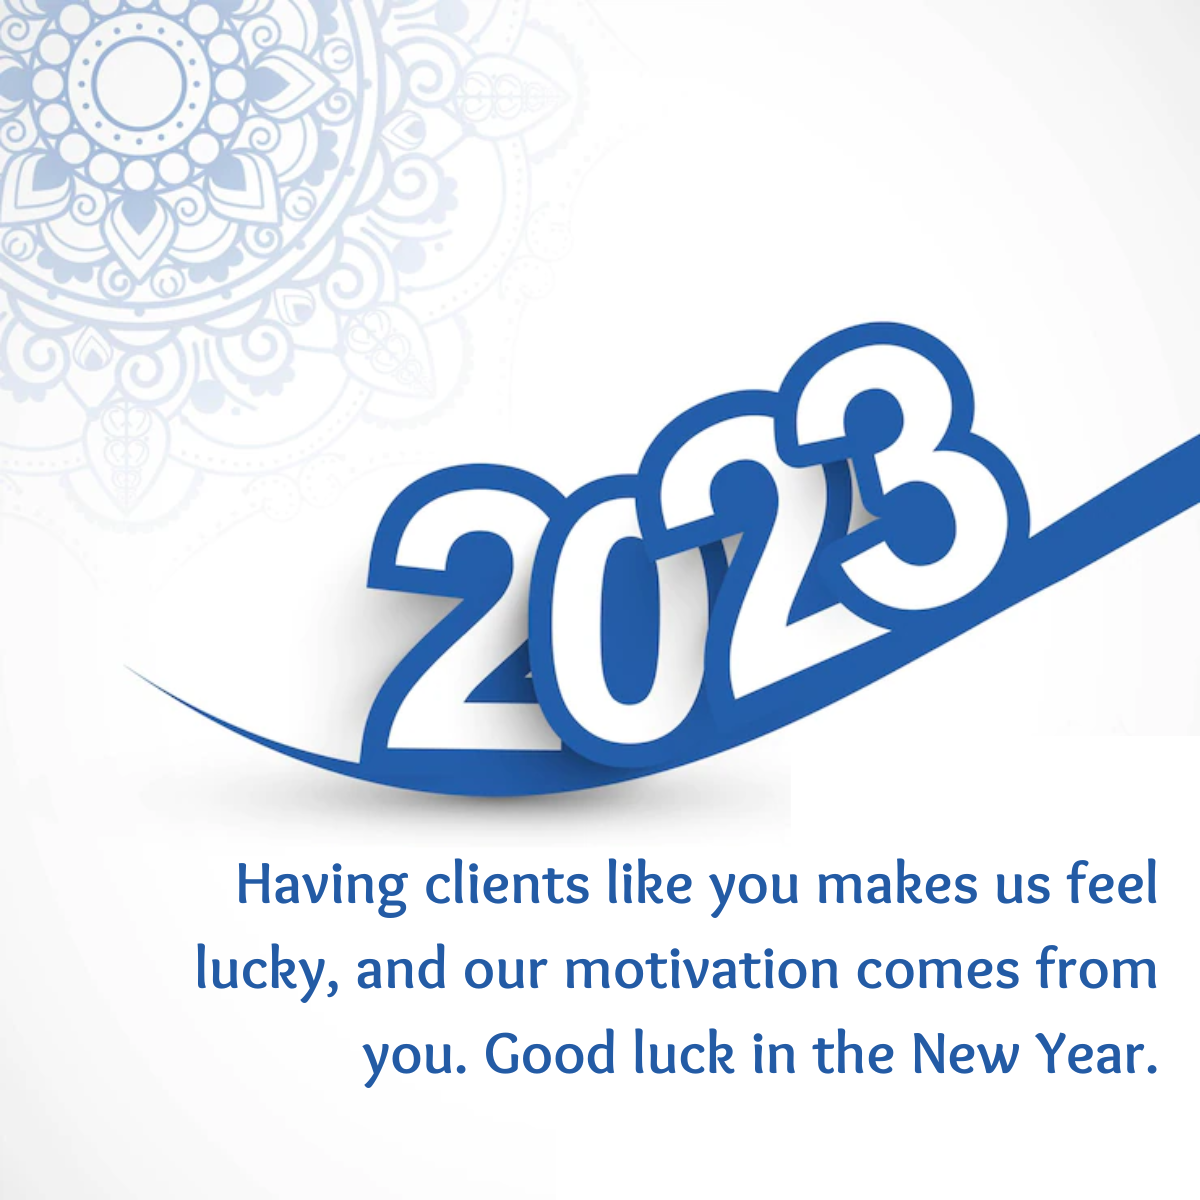 Happy New Year 2023 Best Hd Images Wishes Quotes Greetings Messages And Posters For